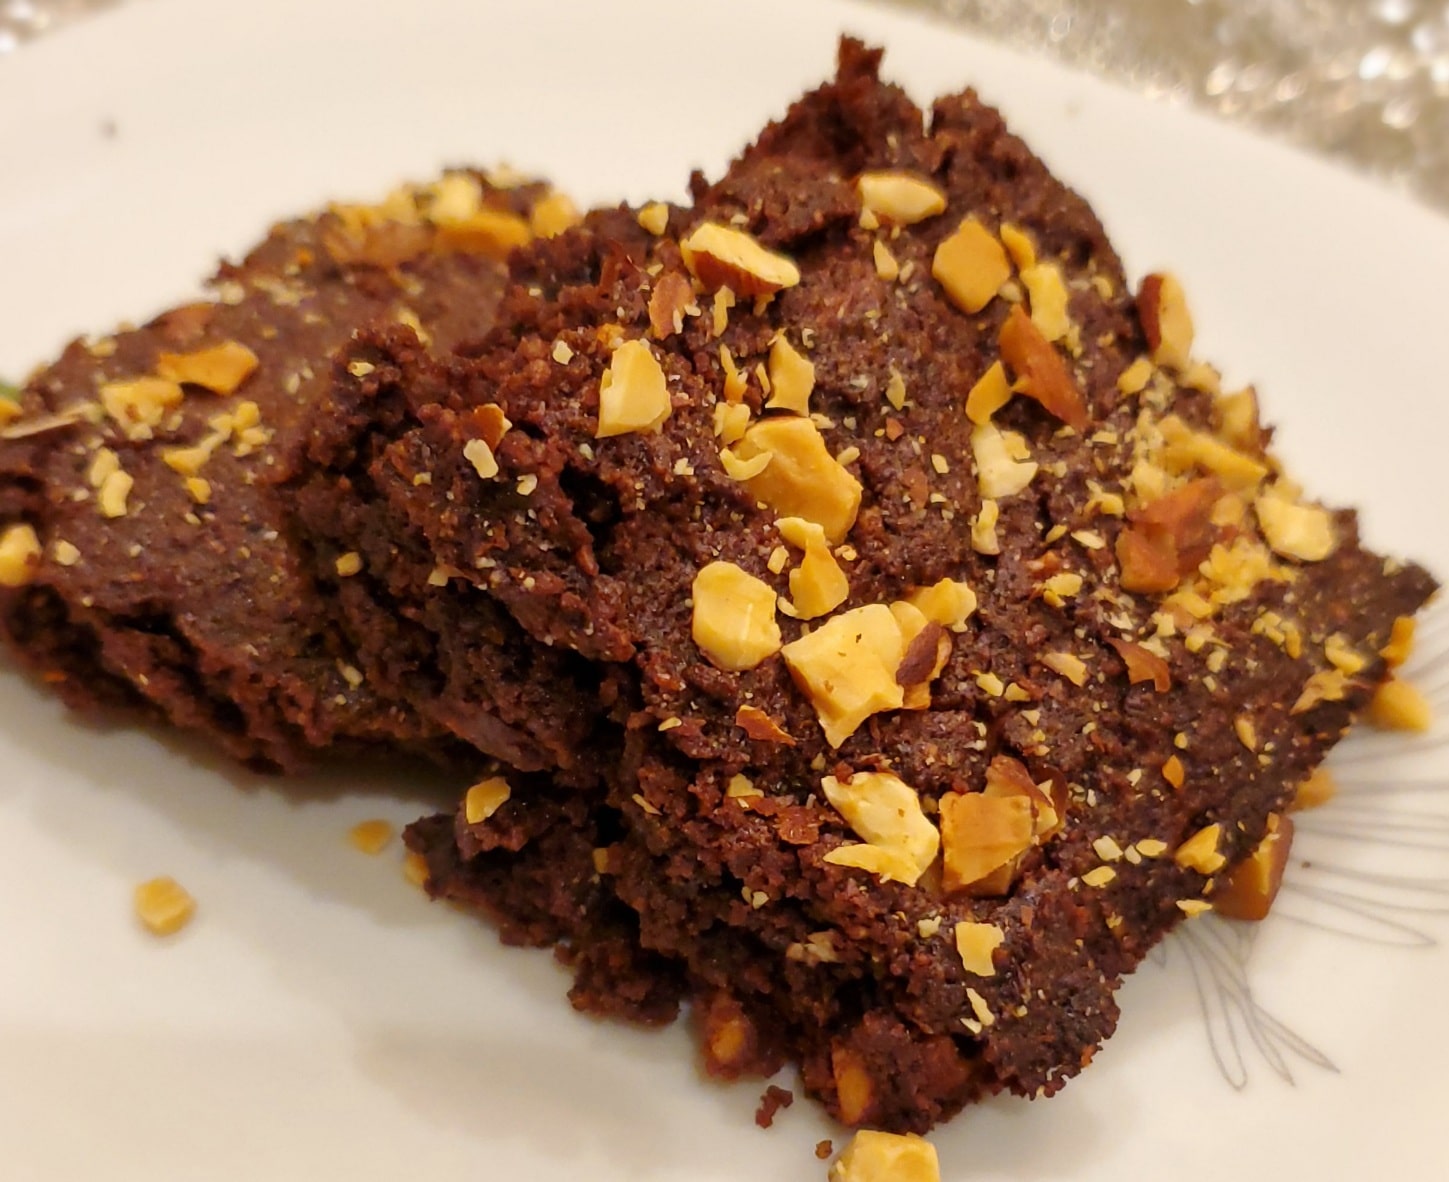 Keto Brownies made with Almond Flour